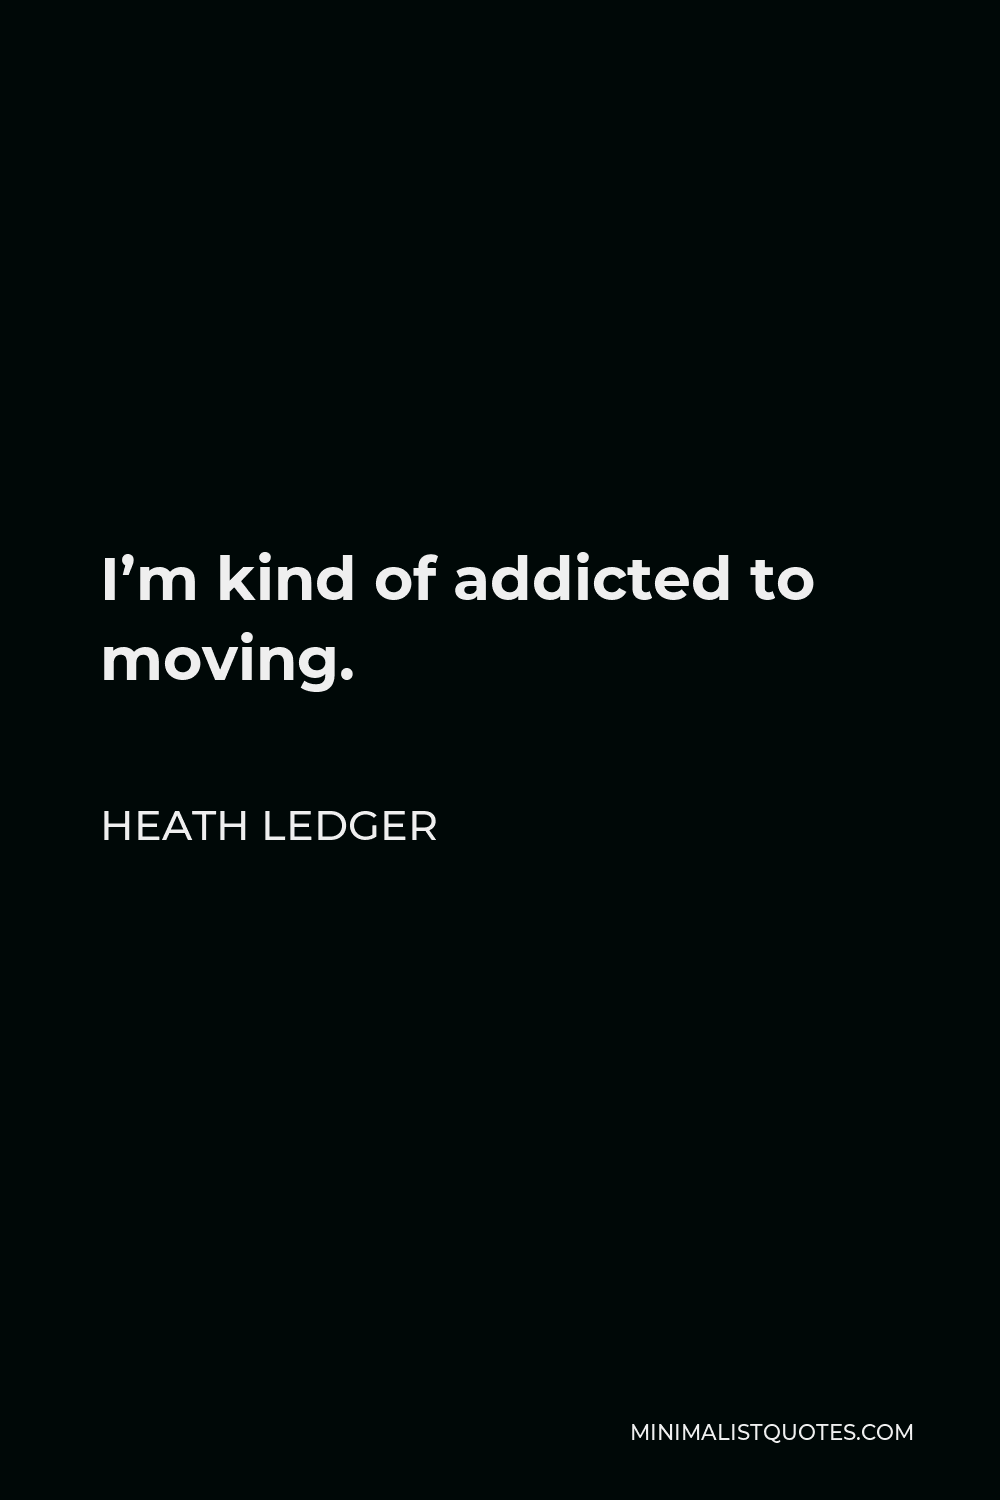 Heath Ledger Quote - I’m kind of addicted to moving.